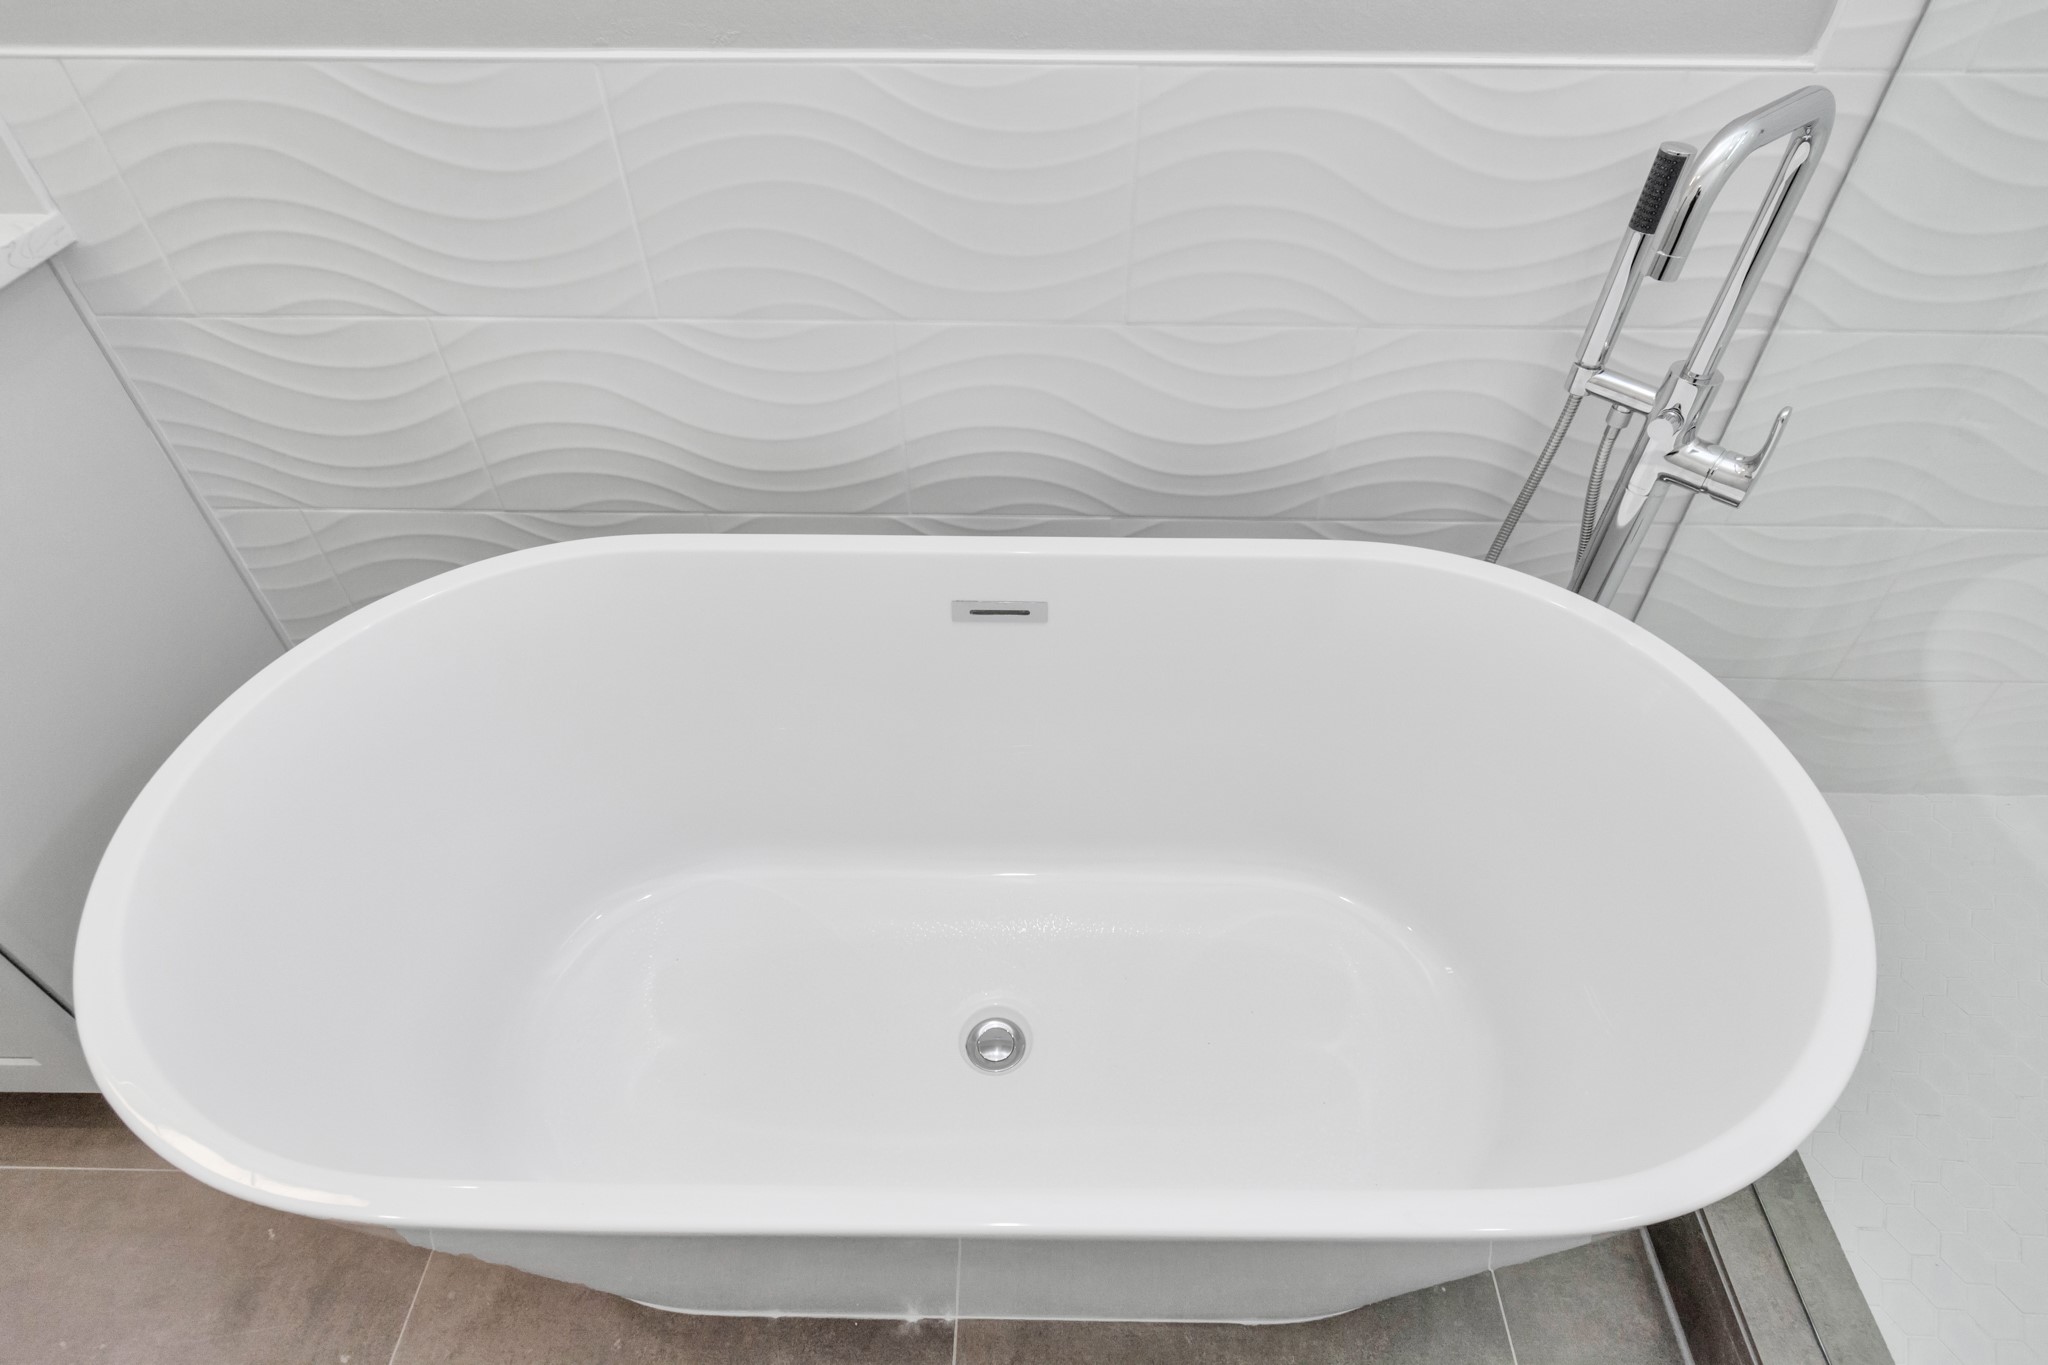 Stunning soaking tub, perfect for relaxing after a long day!